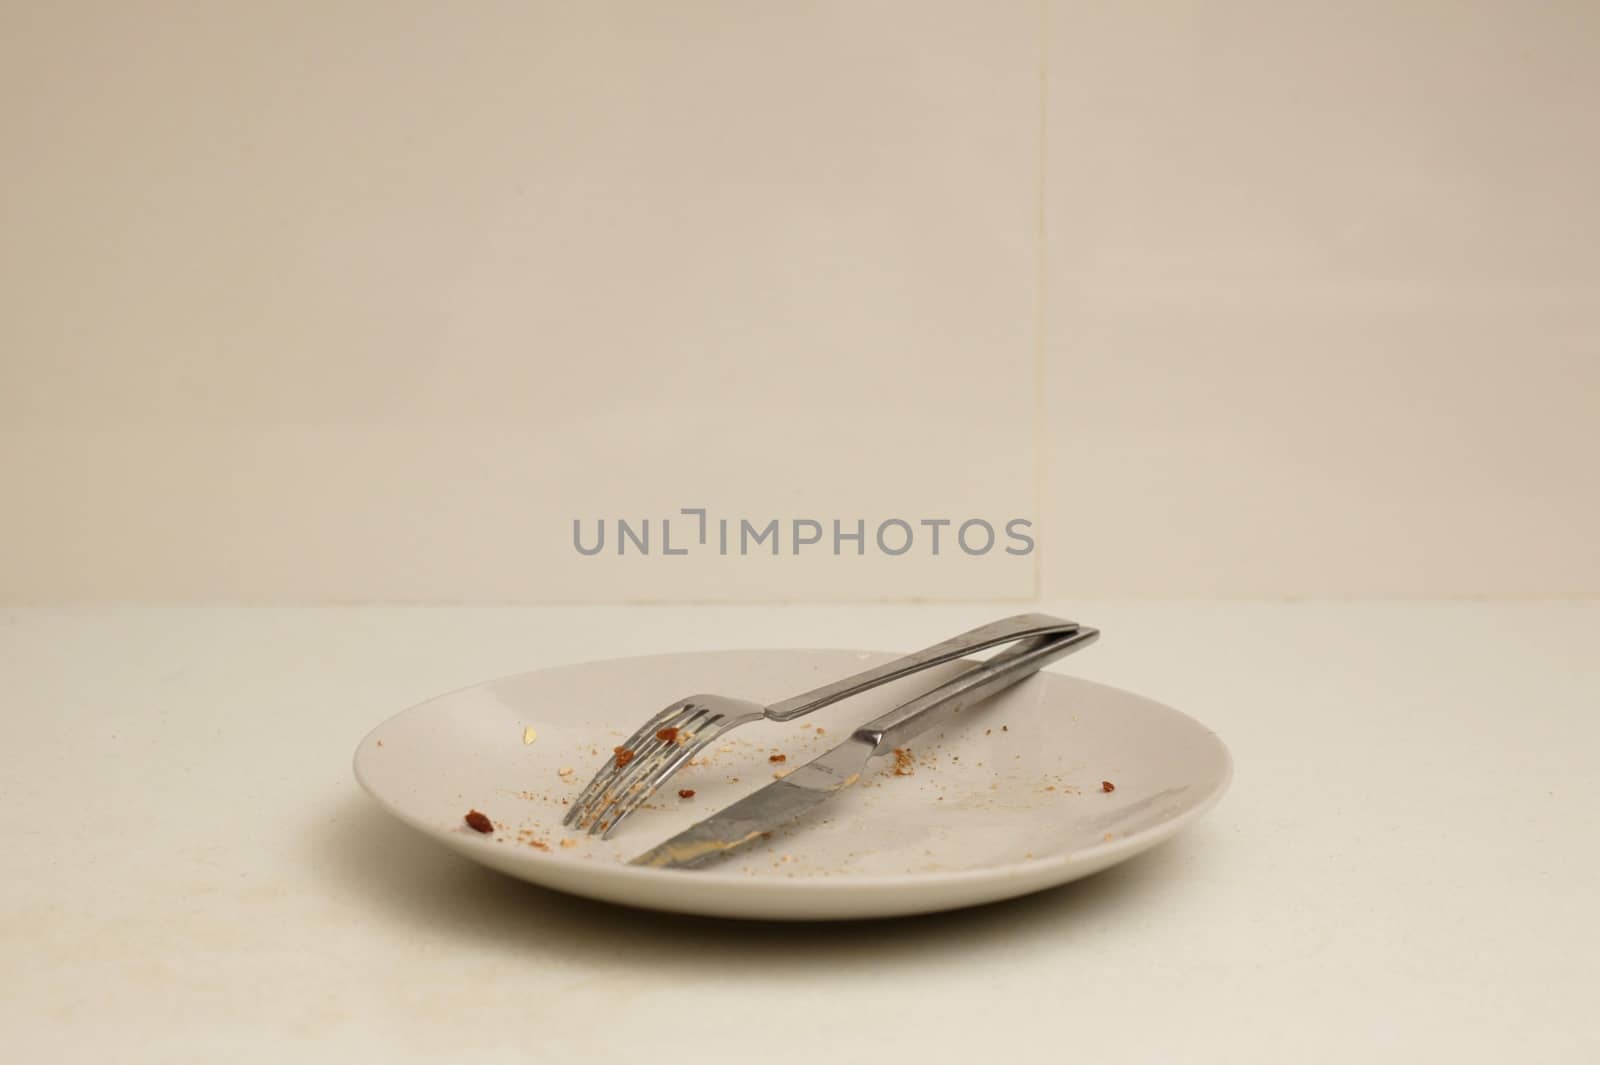 A dinner plate isolated on a kitch bench